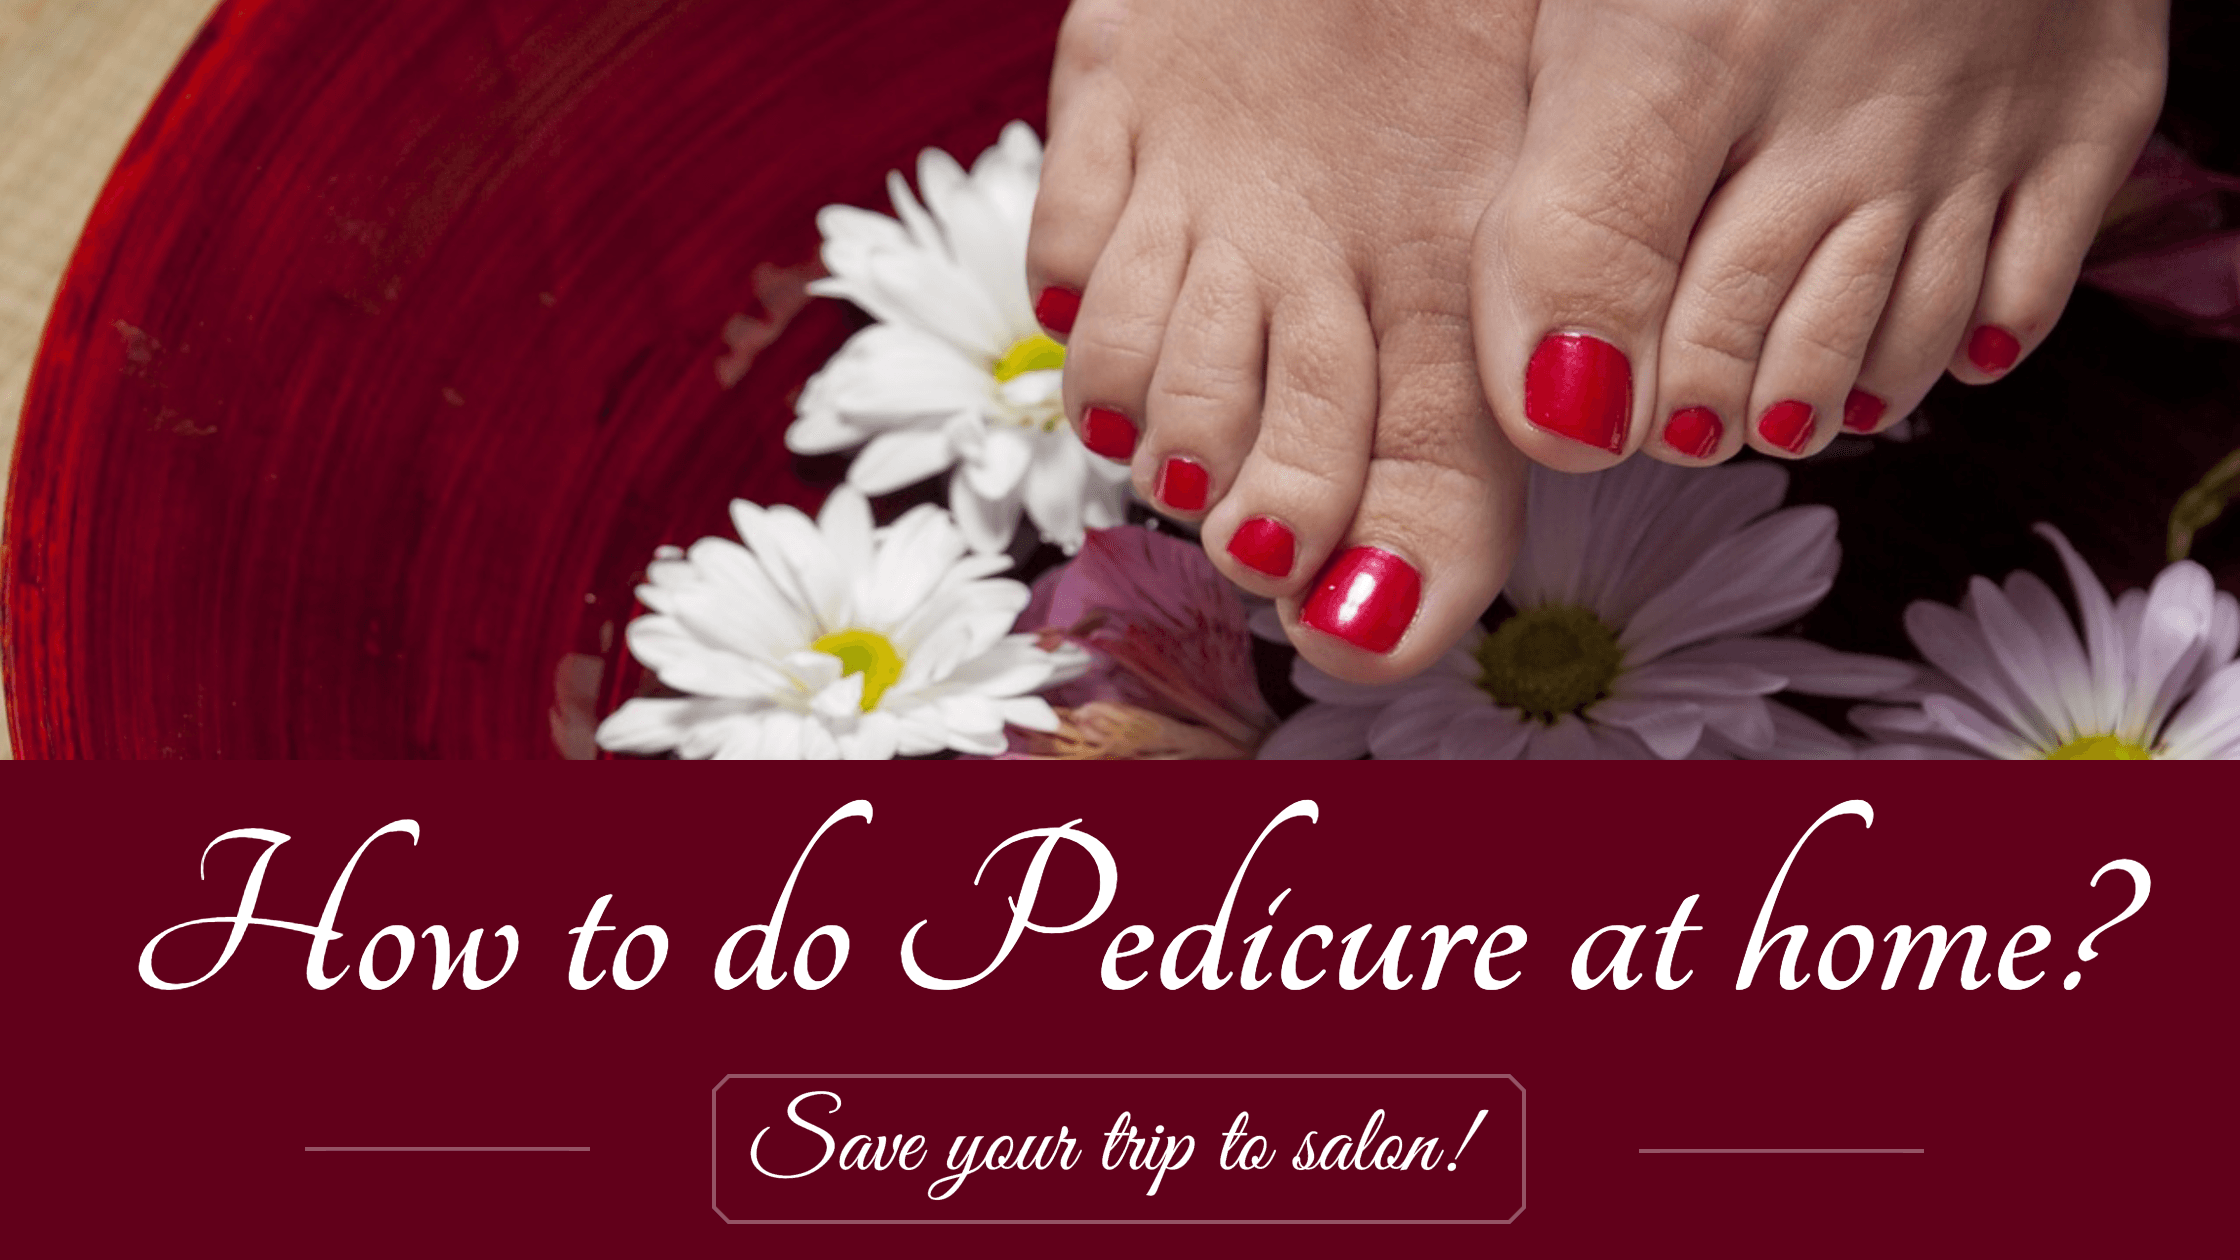 toenails-with-red-nail-color-pedicure-at-home-blog-banner-template-thumbnail-img